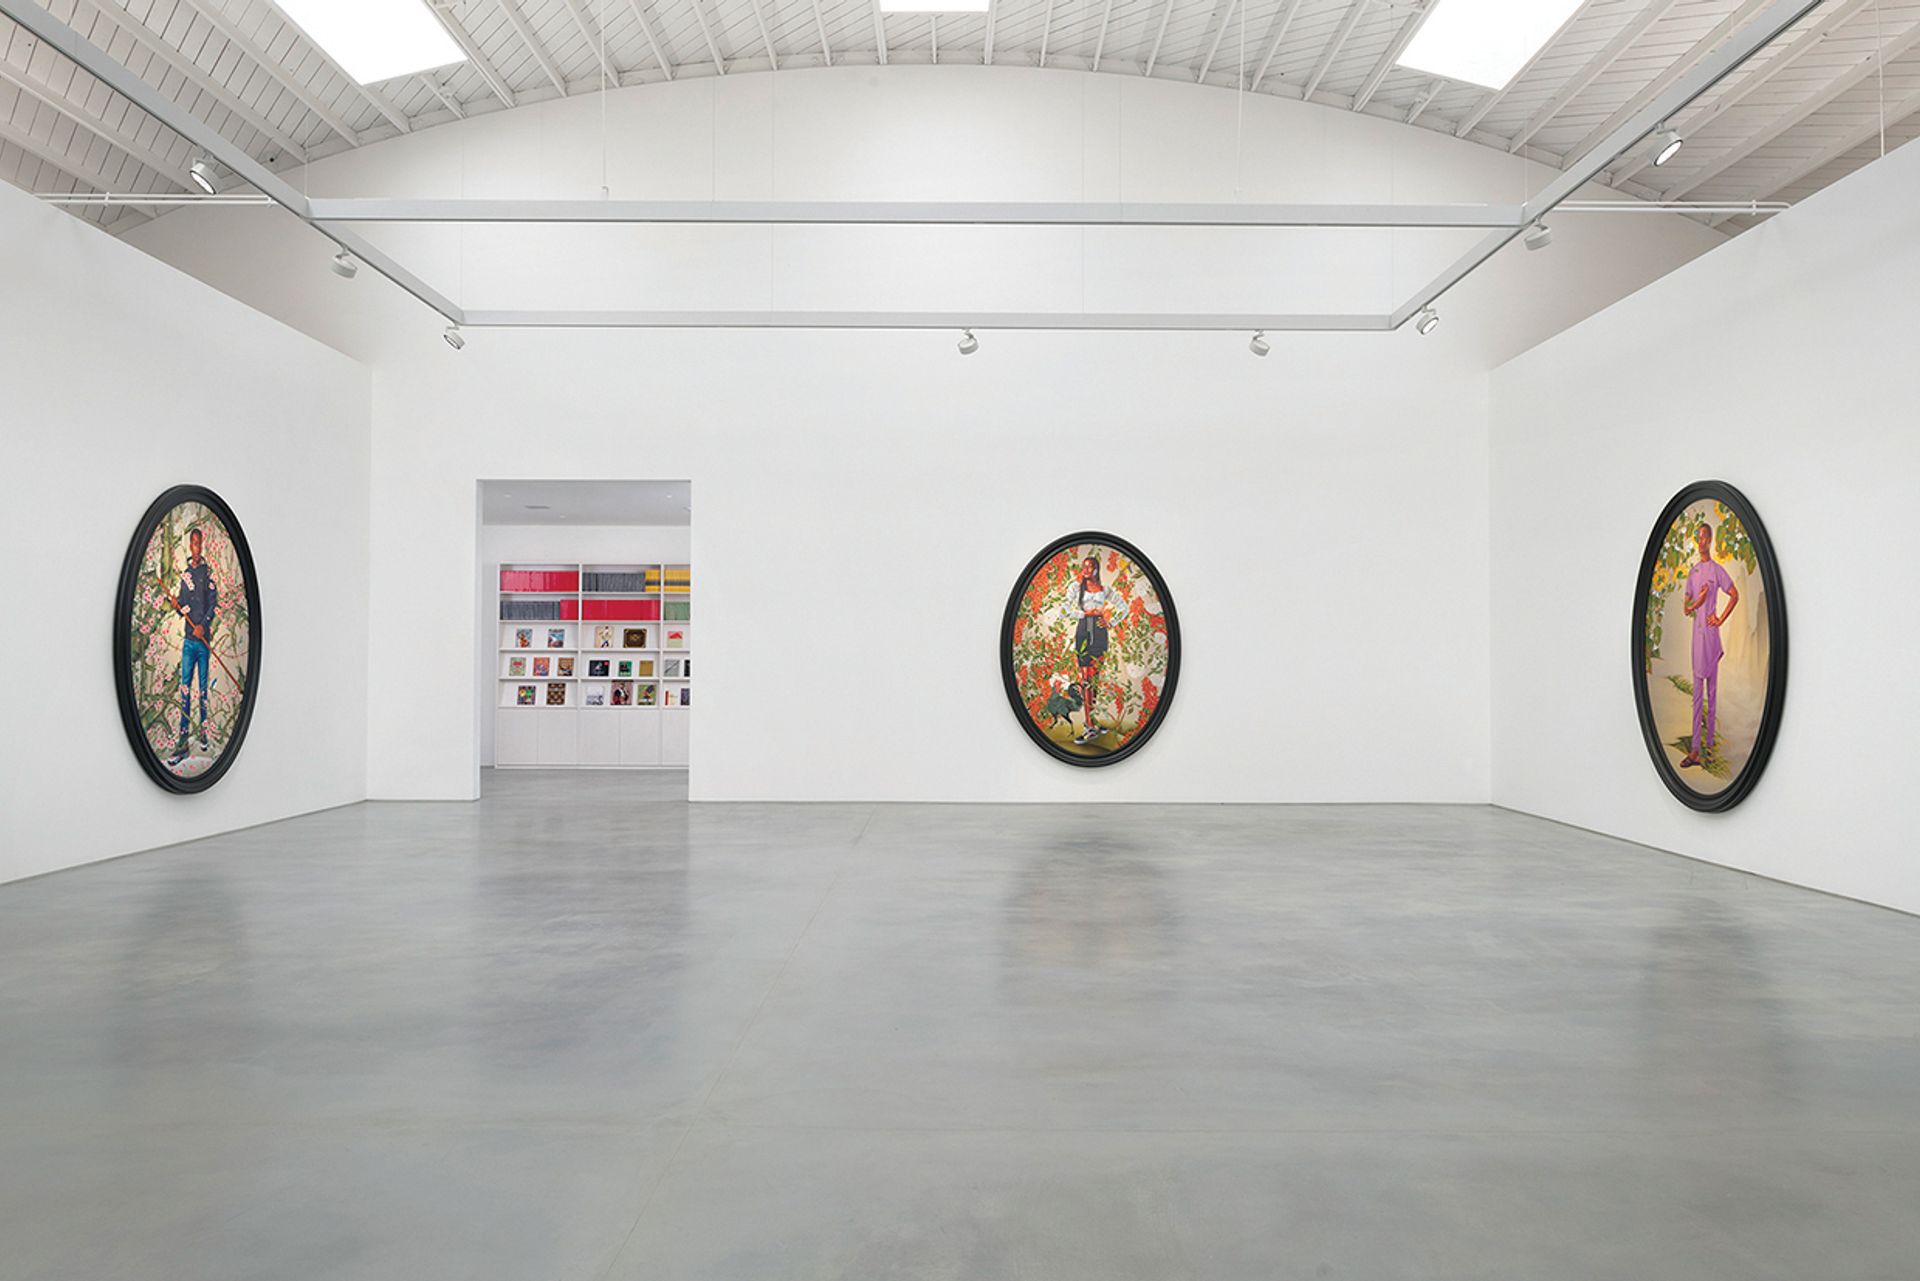 Roberts Projects opened in a former car showroom with a Kehinde Wiley exhibition Robert Wedemeyer